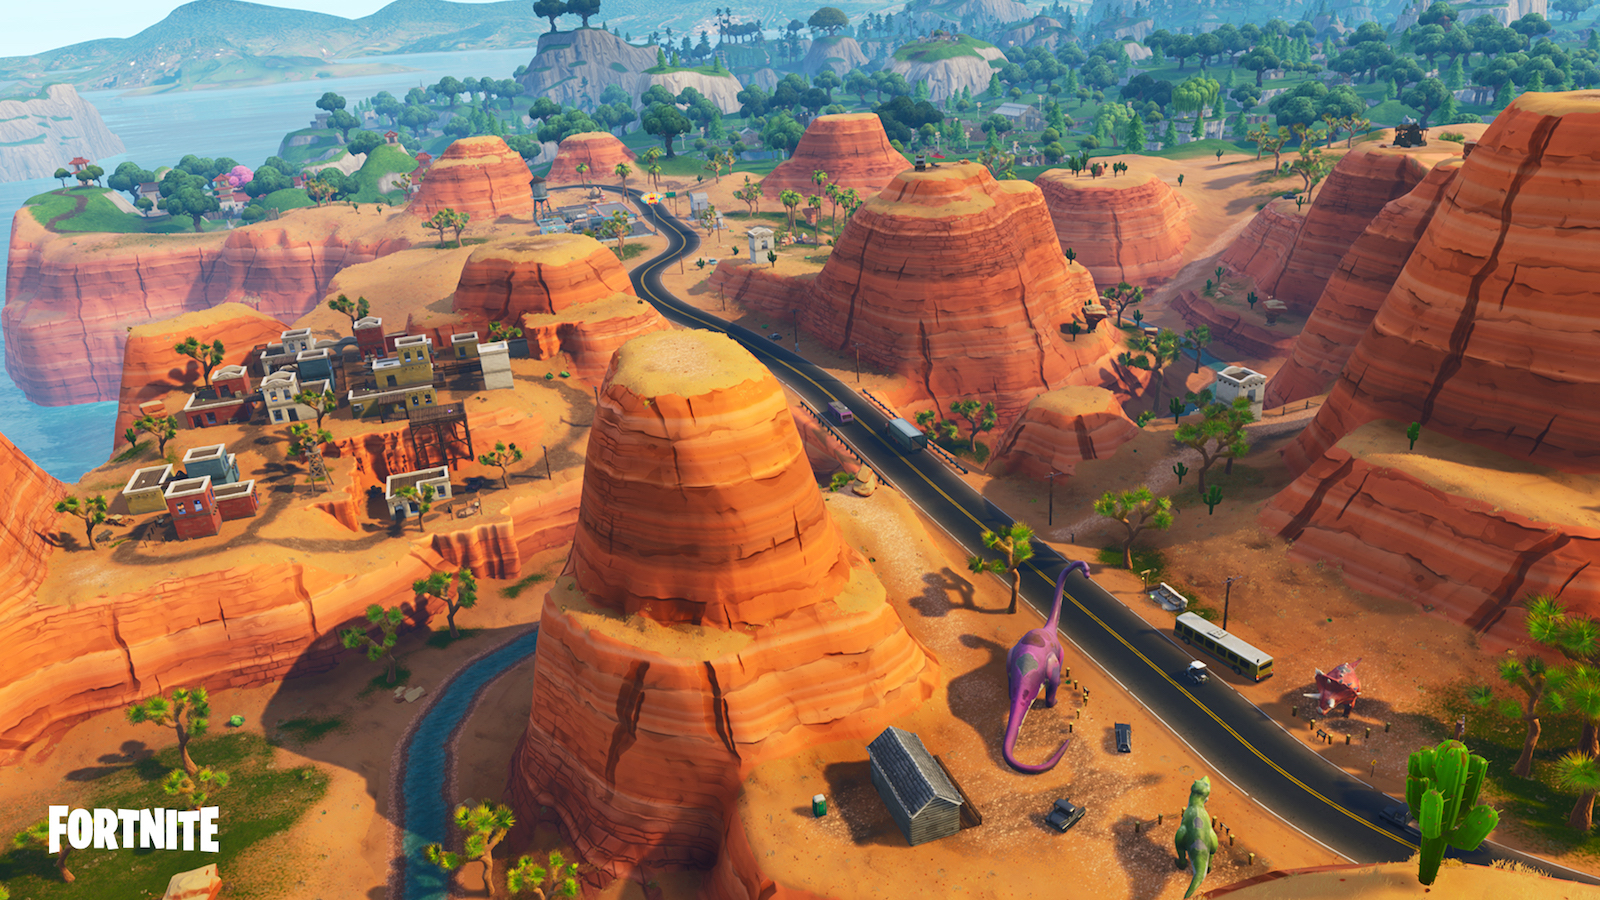 fortnite while the new locations and features will capture your attention epic has made a number of important tweaks to the in game mechanics - apple trees in fortnite locations